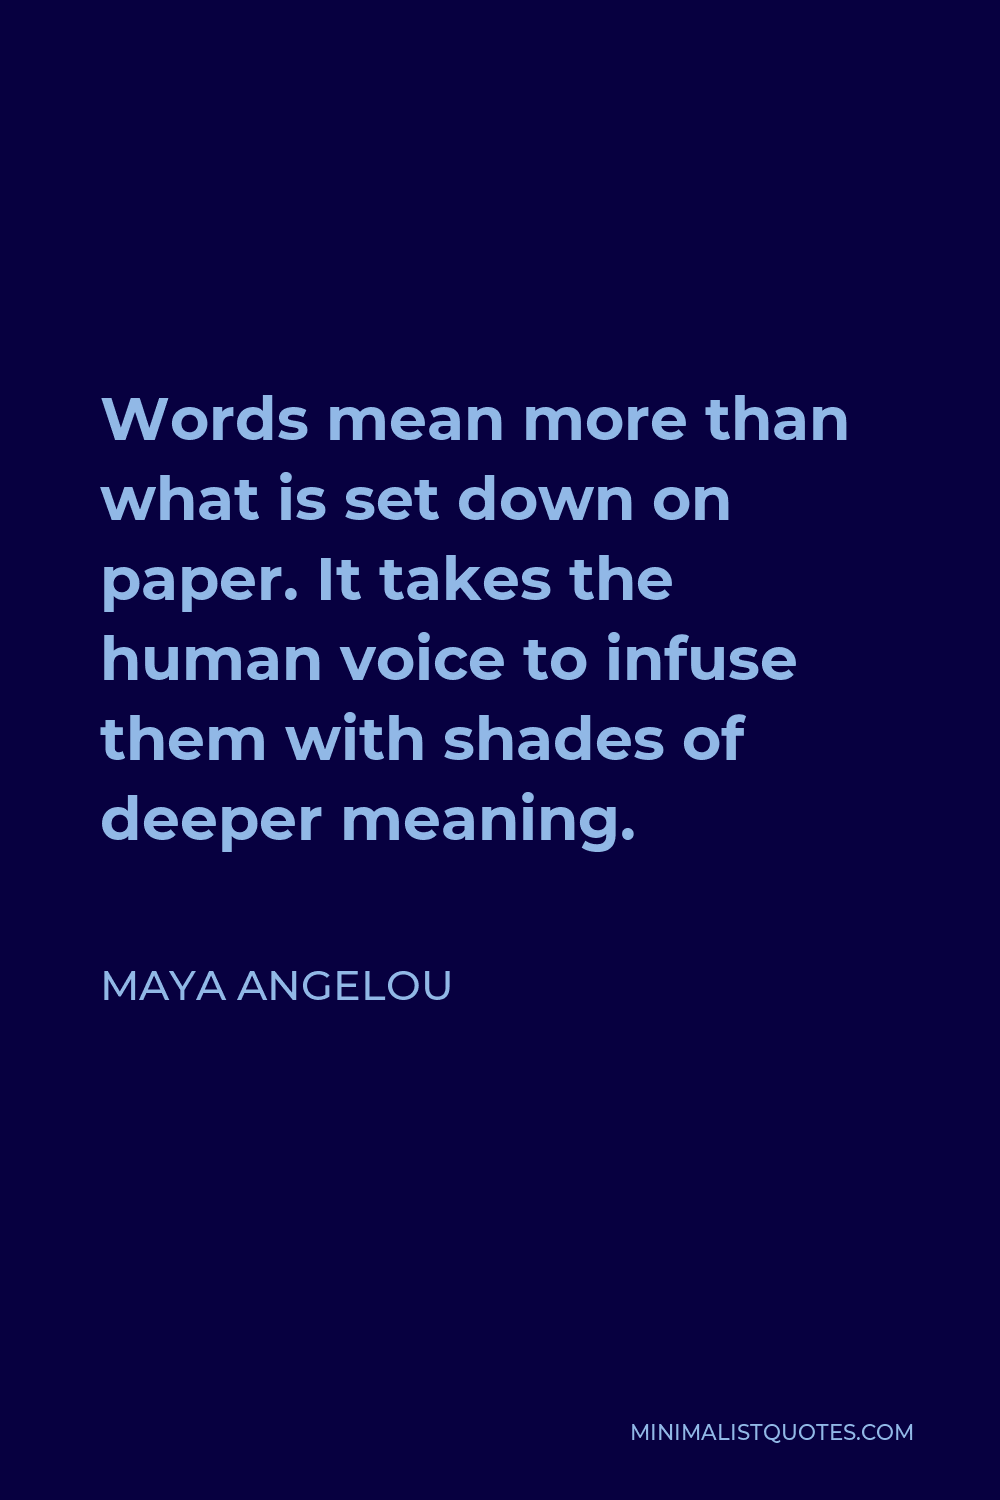 Maya Angelou Quote - Words mean more than what is set down on paper. It takes the human voice to infuse them with shades of deeper meaning.